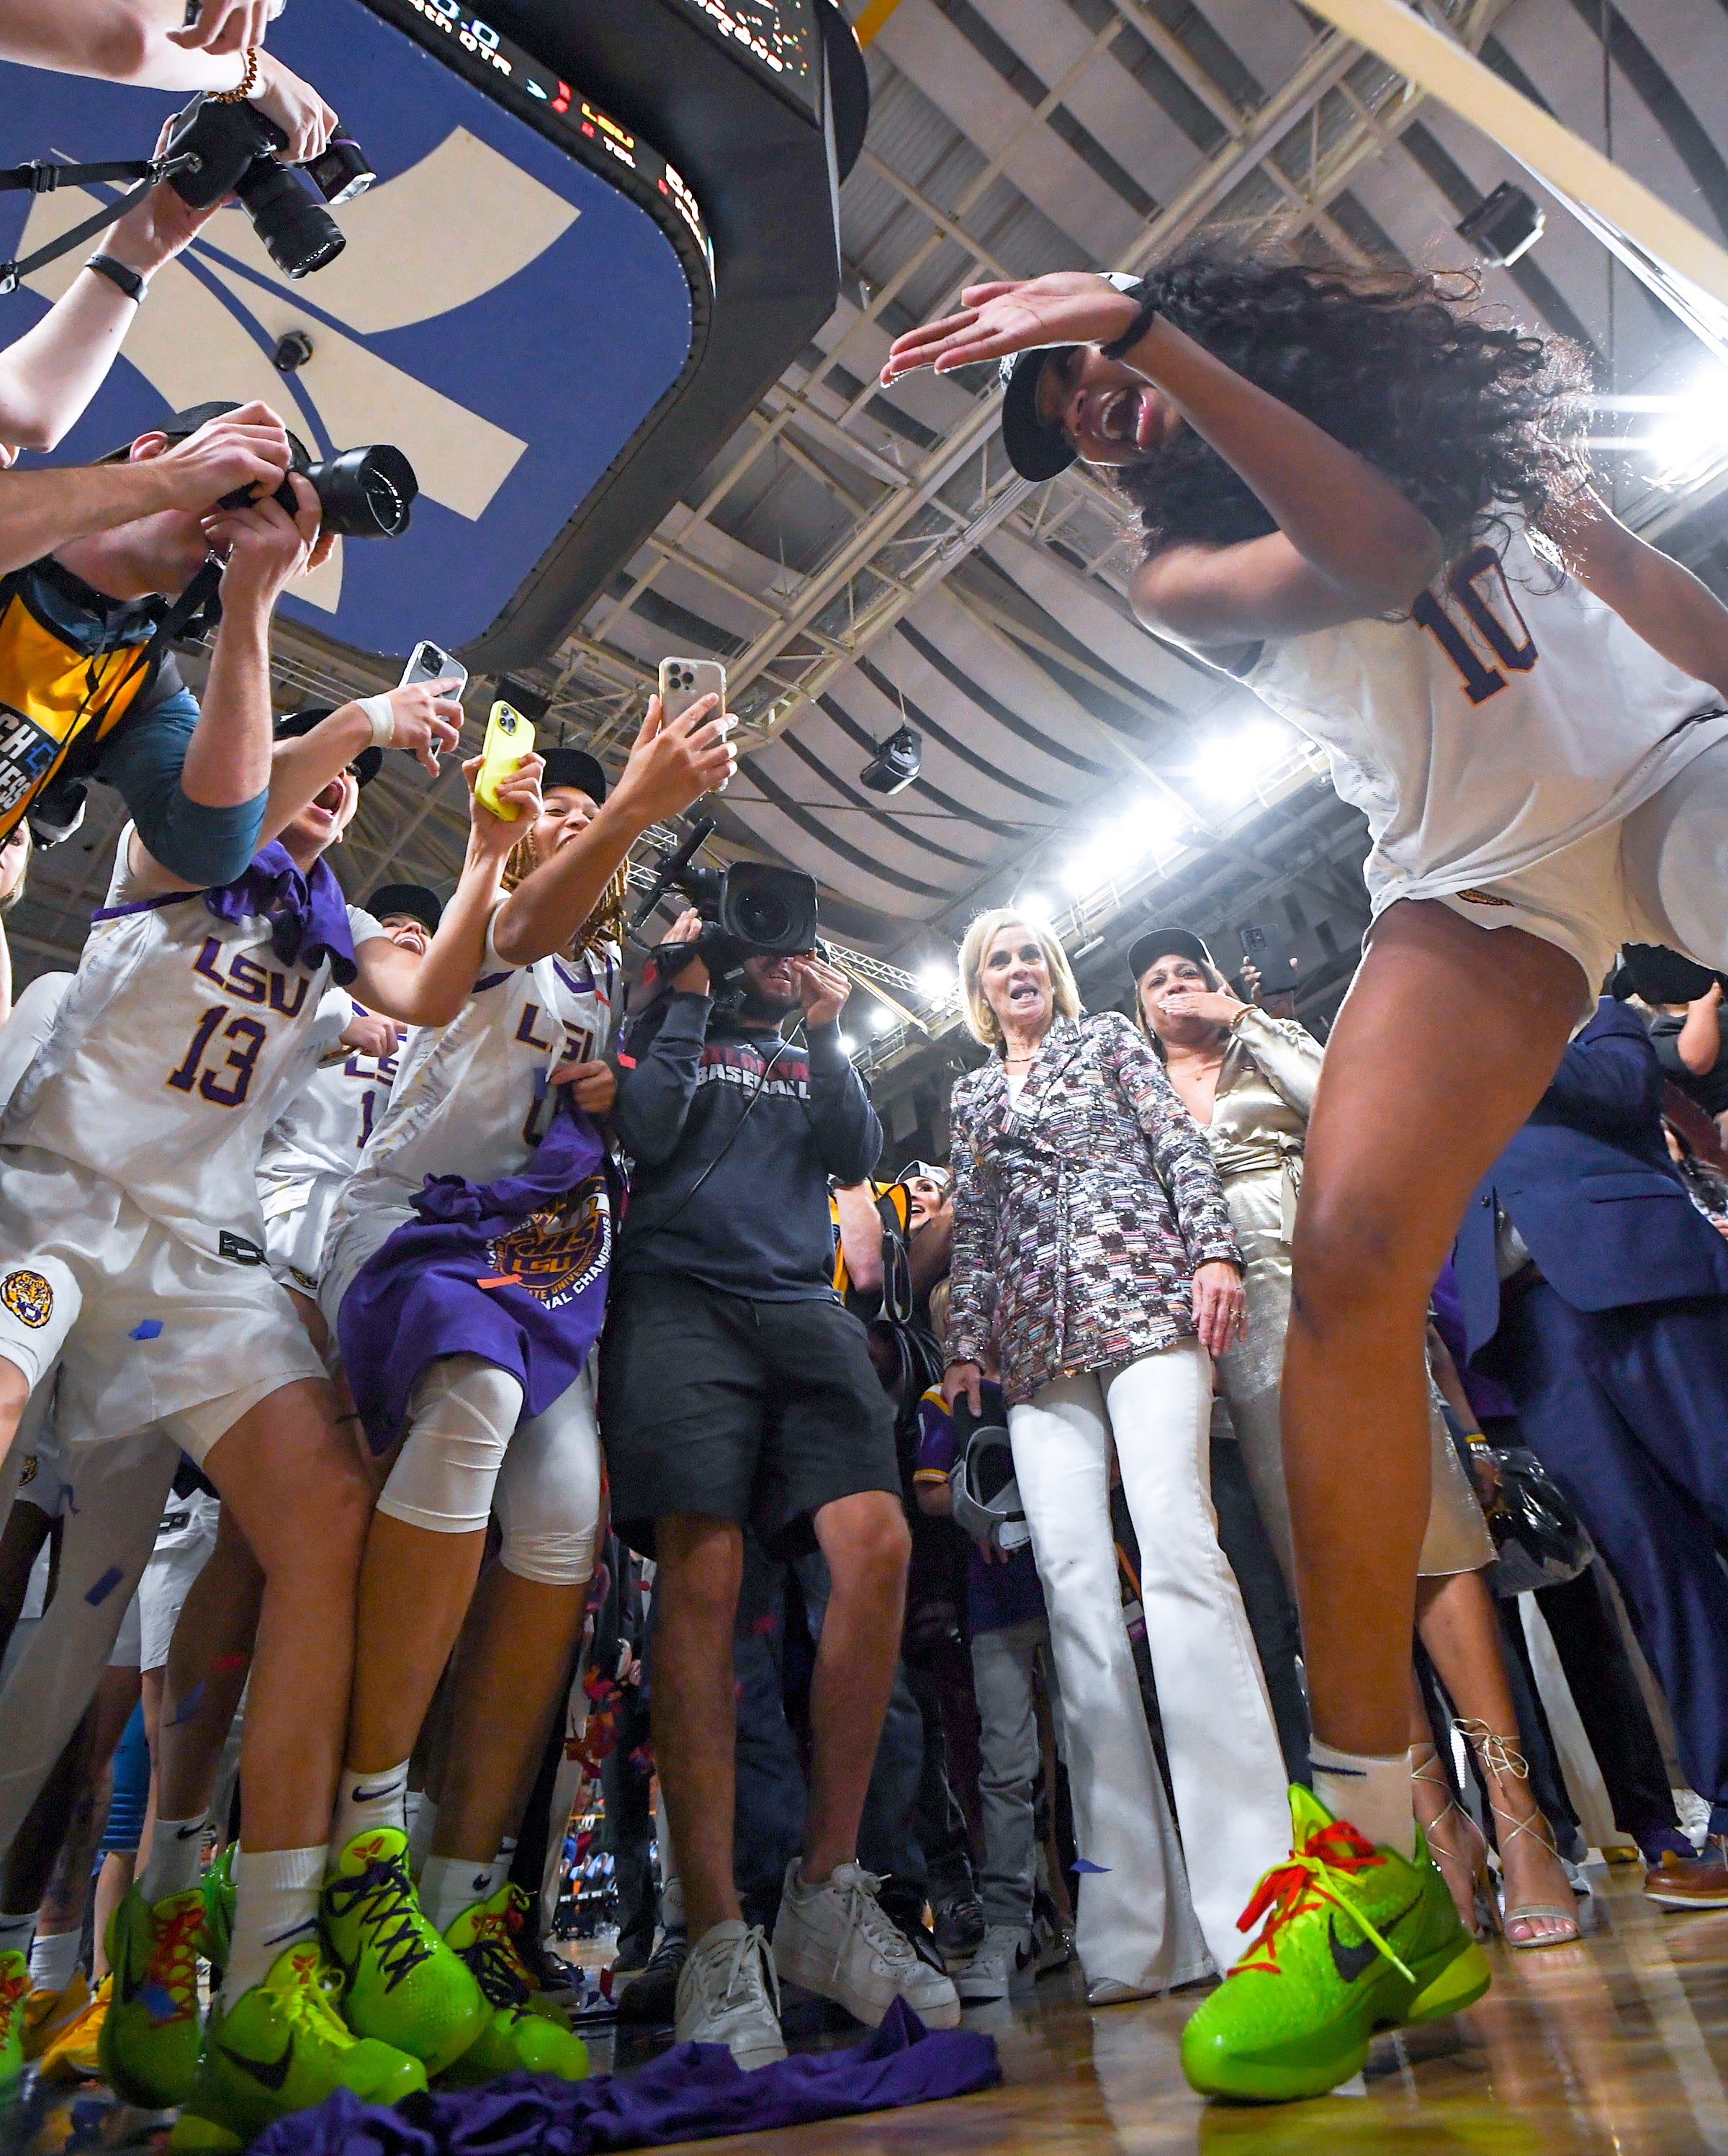 Louisiana State University forward Angel Reese (10) celebrates with teammates after they beat Miami the Elite Eight NCAA Women's Basketball Tournament game at the Bon Secours Wellness Arena in Greenville, S.C. Sunday, March 26, 2023. LSU won 54-42.